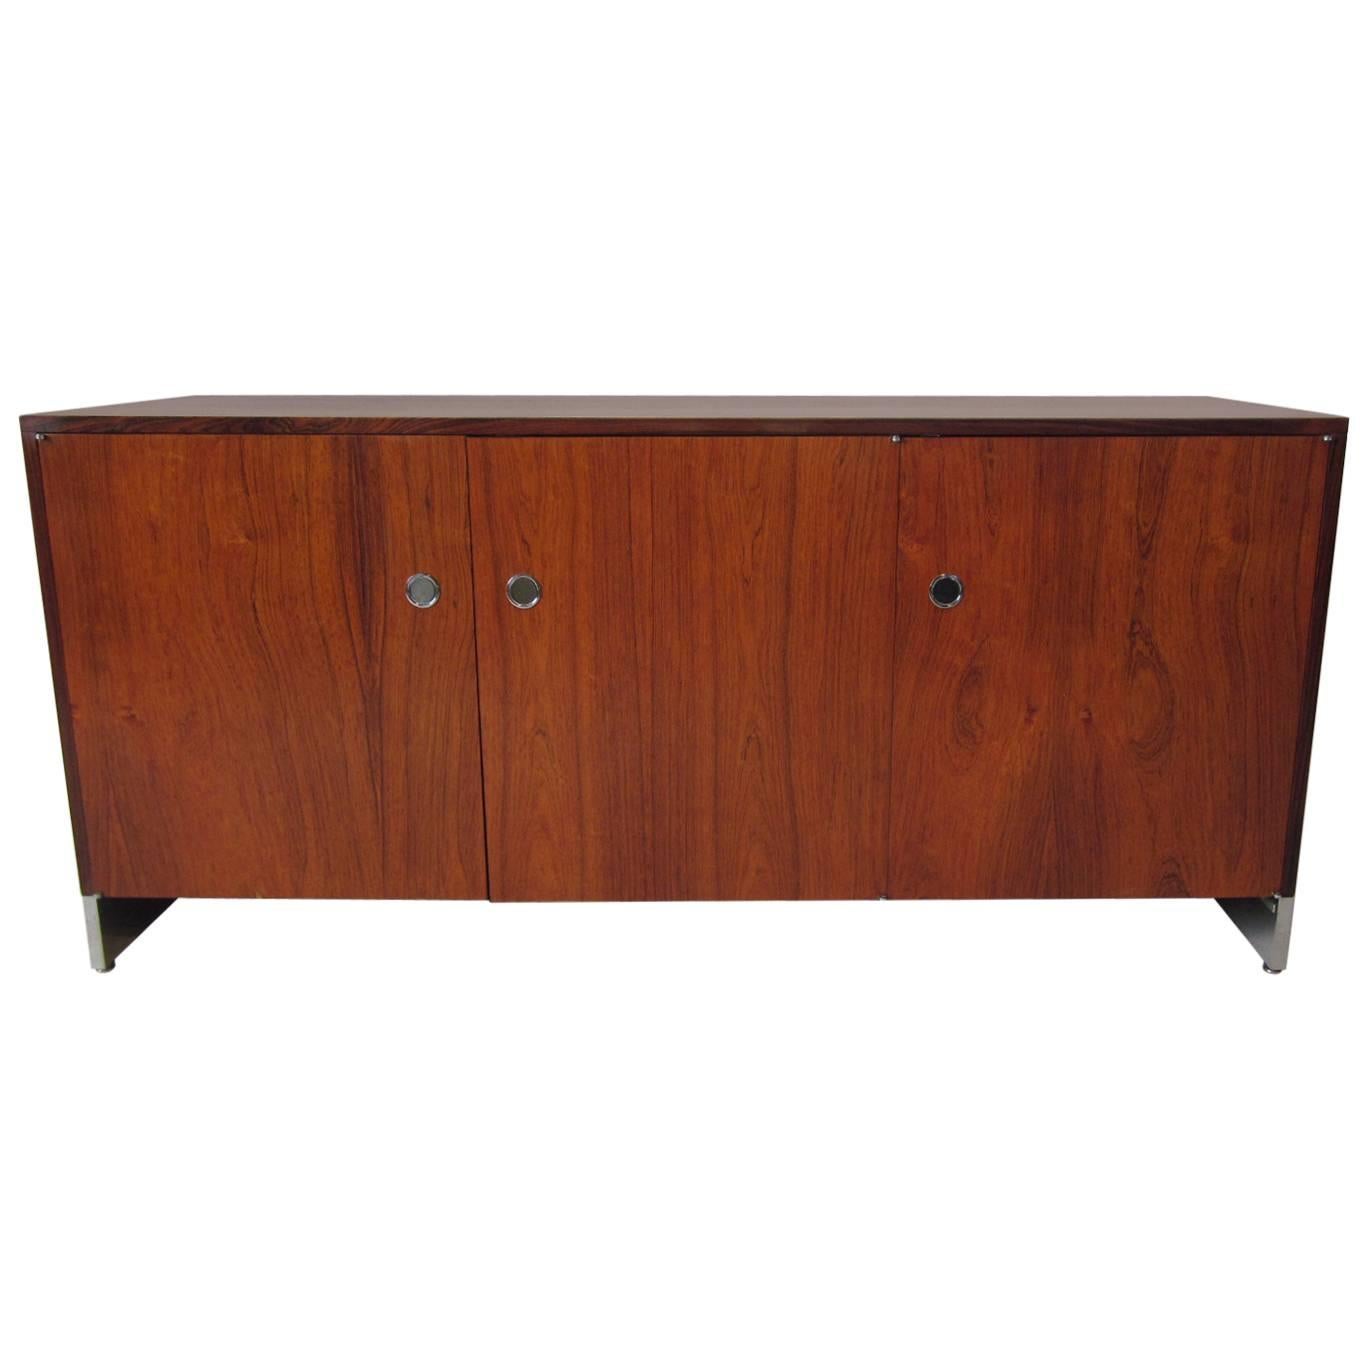 Roger Spunger Styled Rosewood Mid-Century Credenza